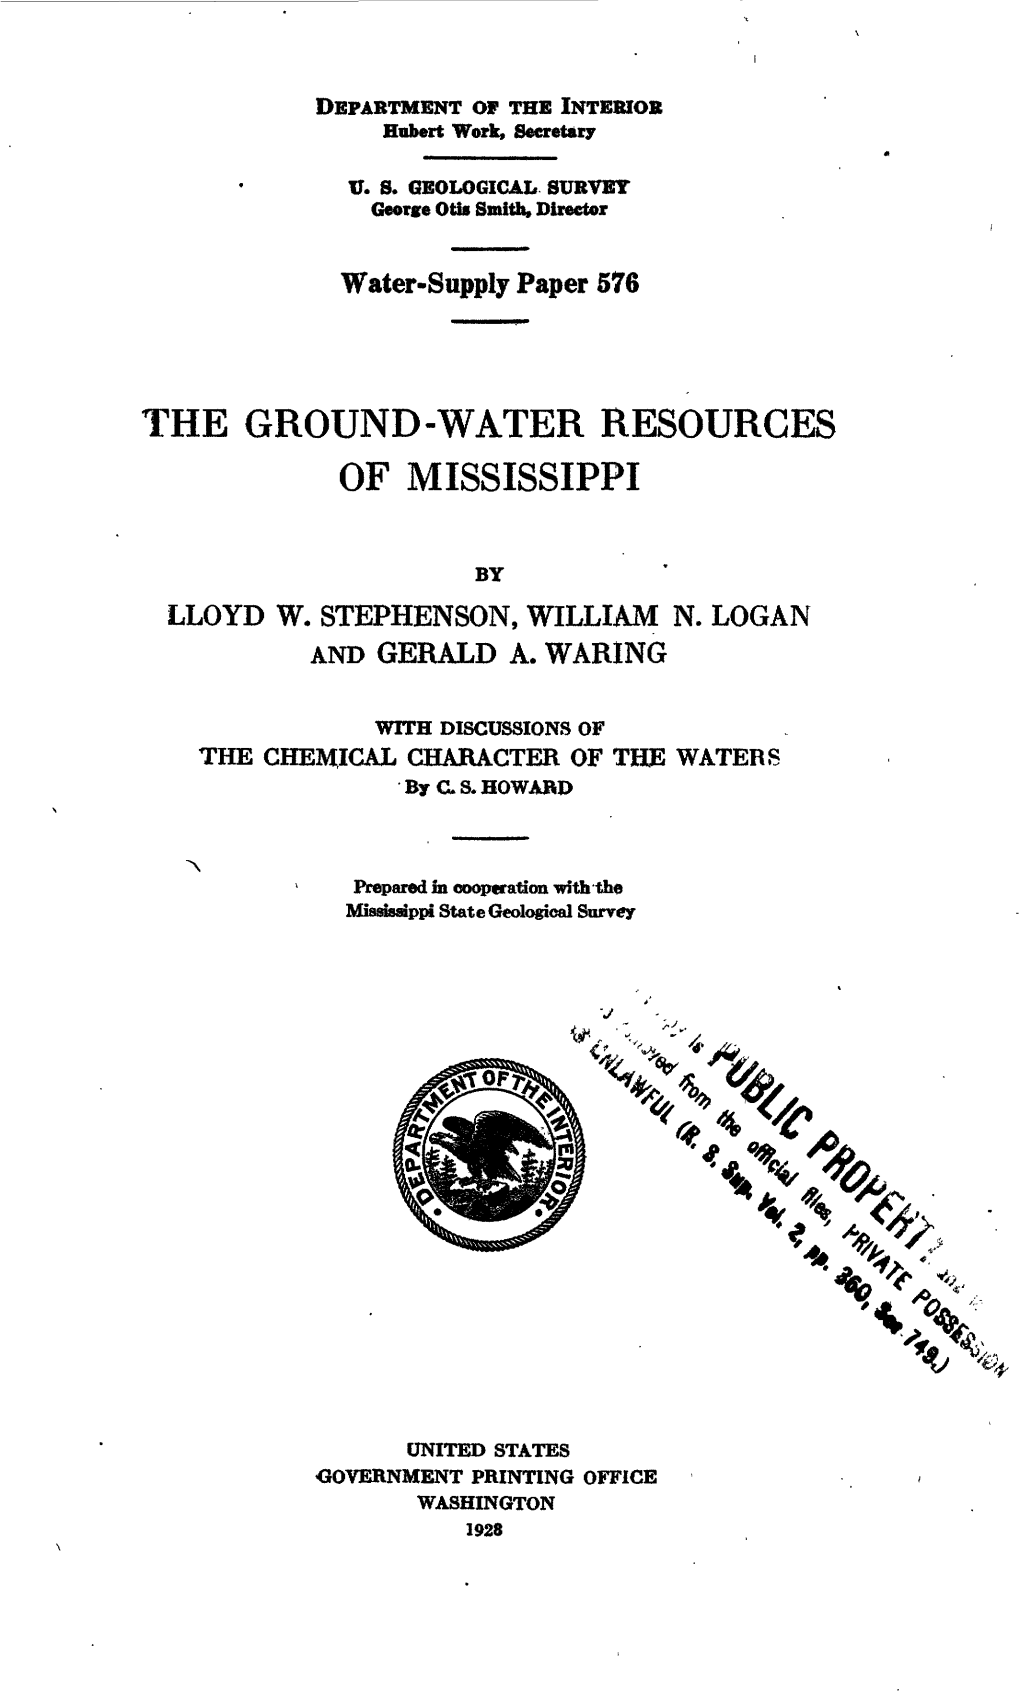 The Ground-Water Resources of Mississippi